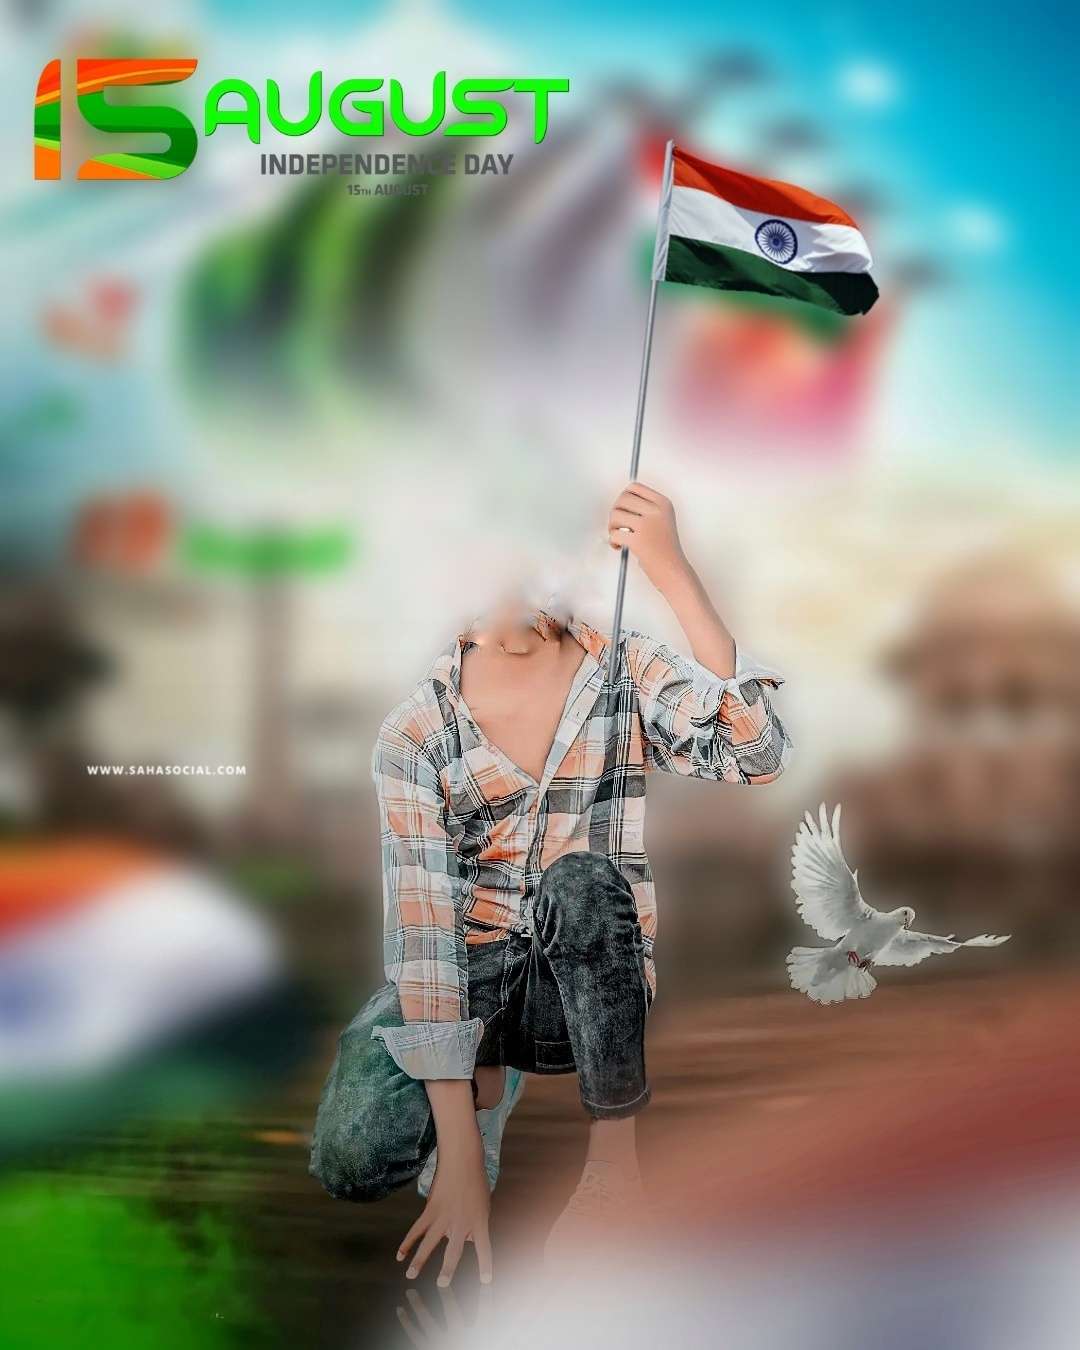 15 August Photo Editing HD Background download,15 August Photo Editing pose, independence day photoshoot pose,15 August cb Photo Editing